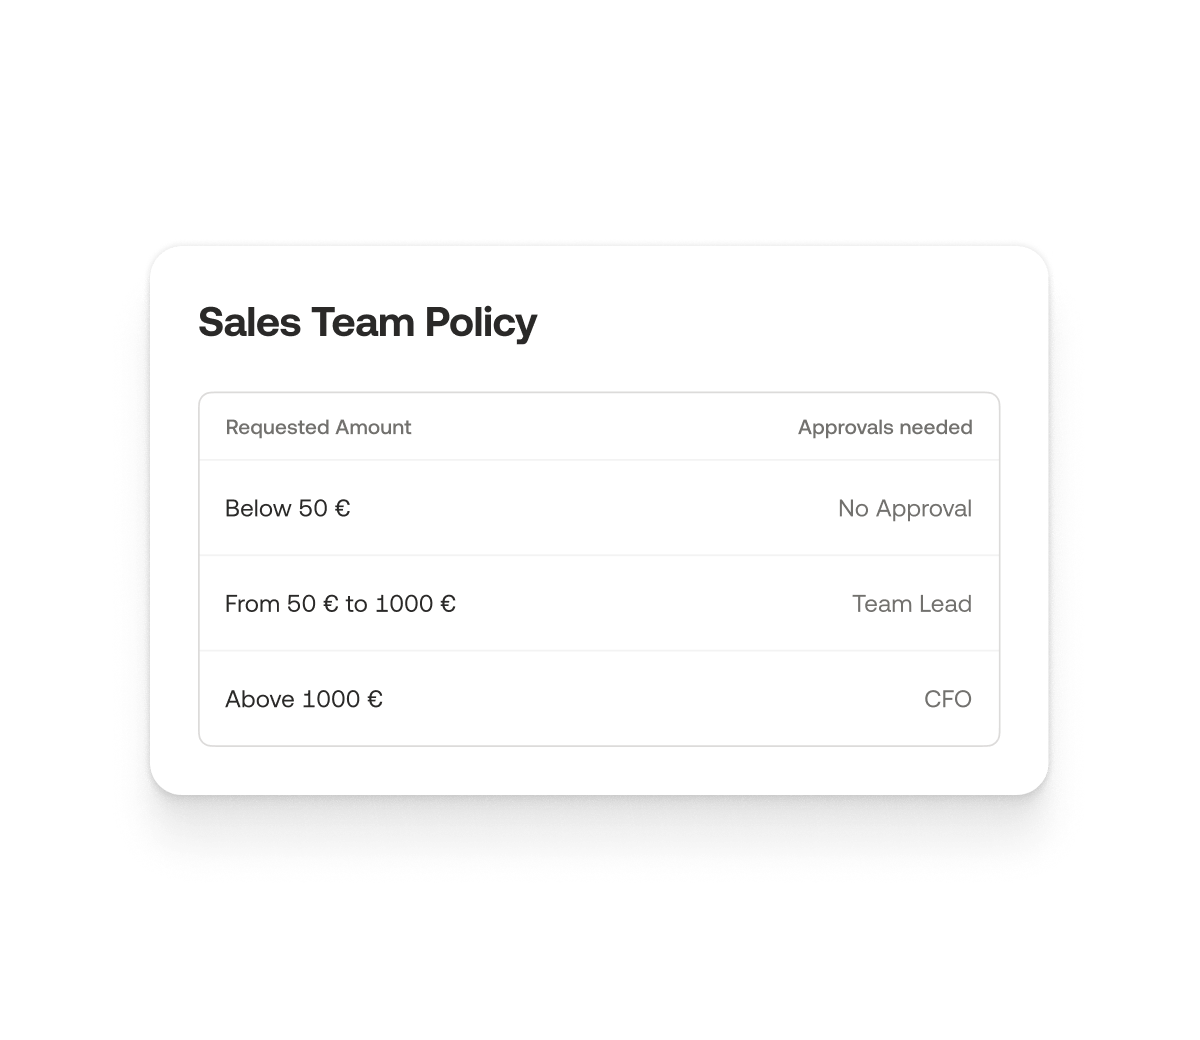 Sales Team Policy